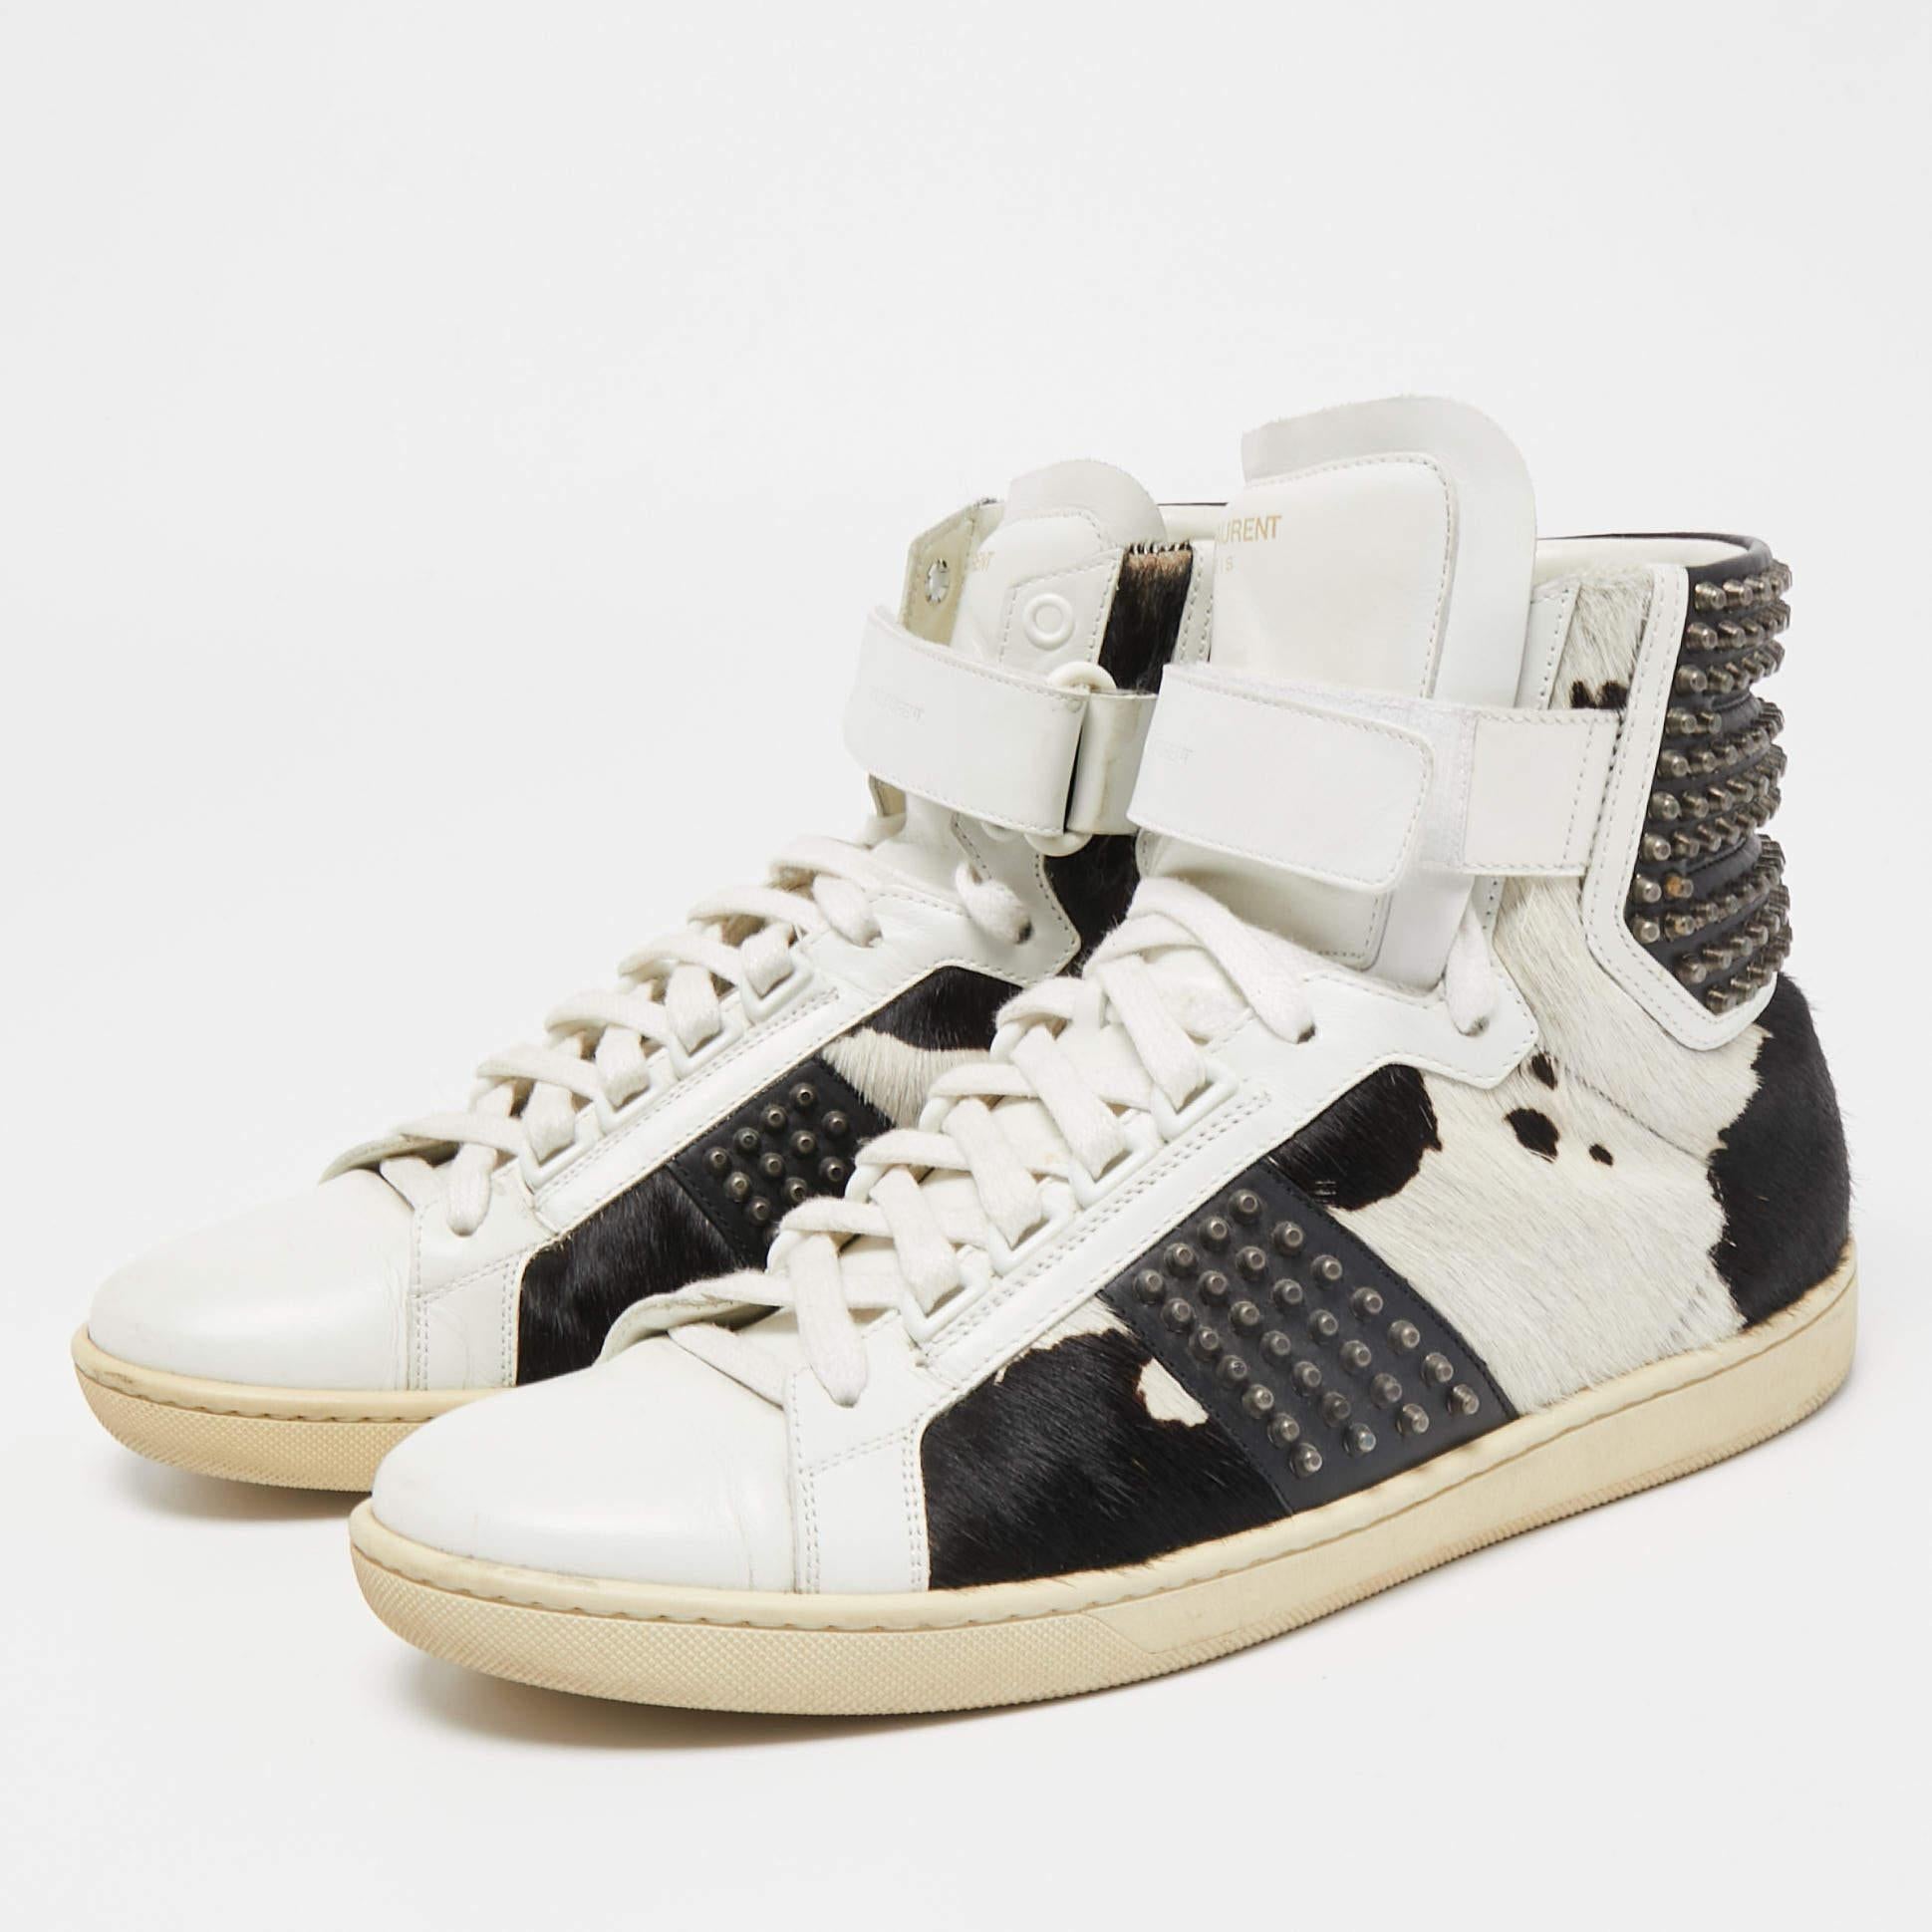 Saint Laurent Leather and Calf Hair Studded High Top Sneakers Size 41 For Sale 1